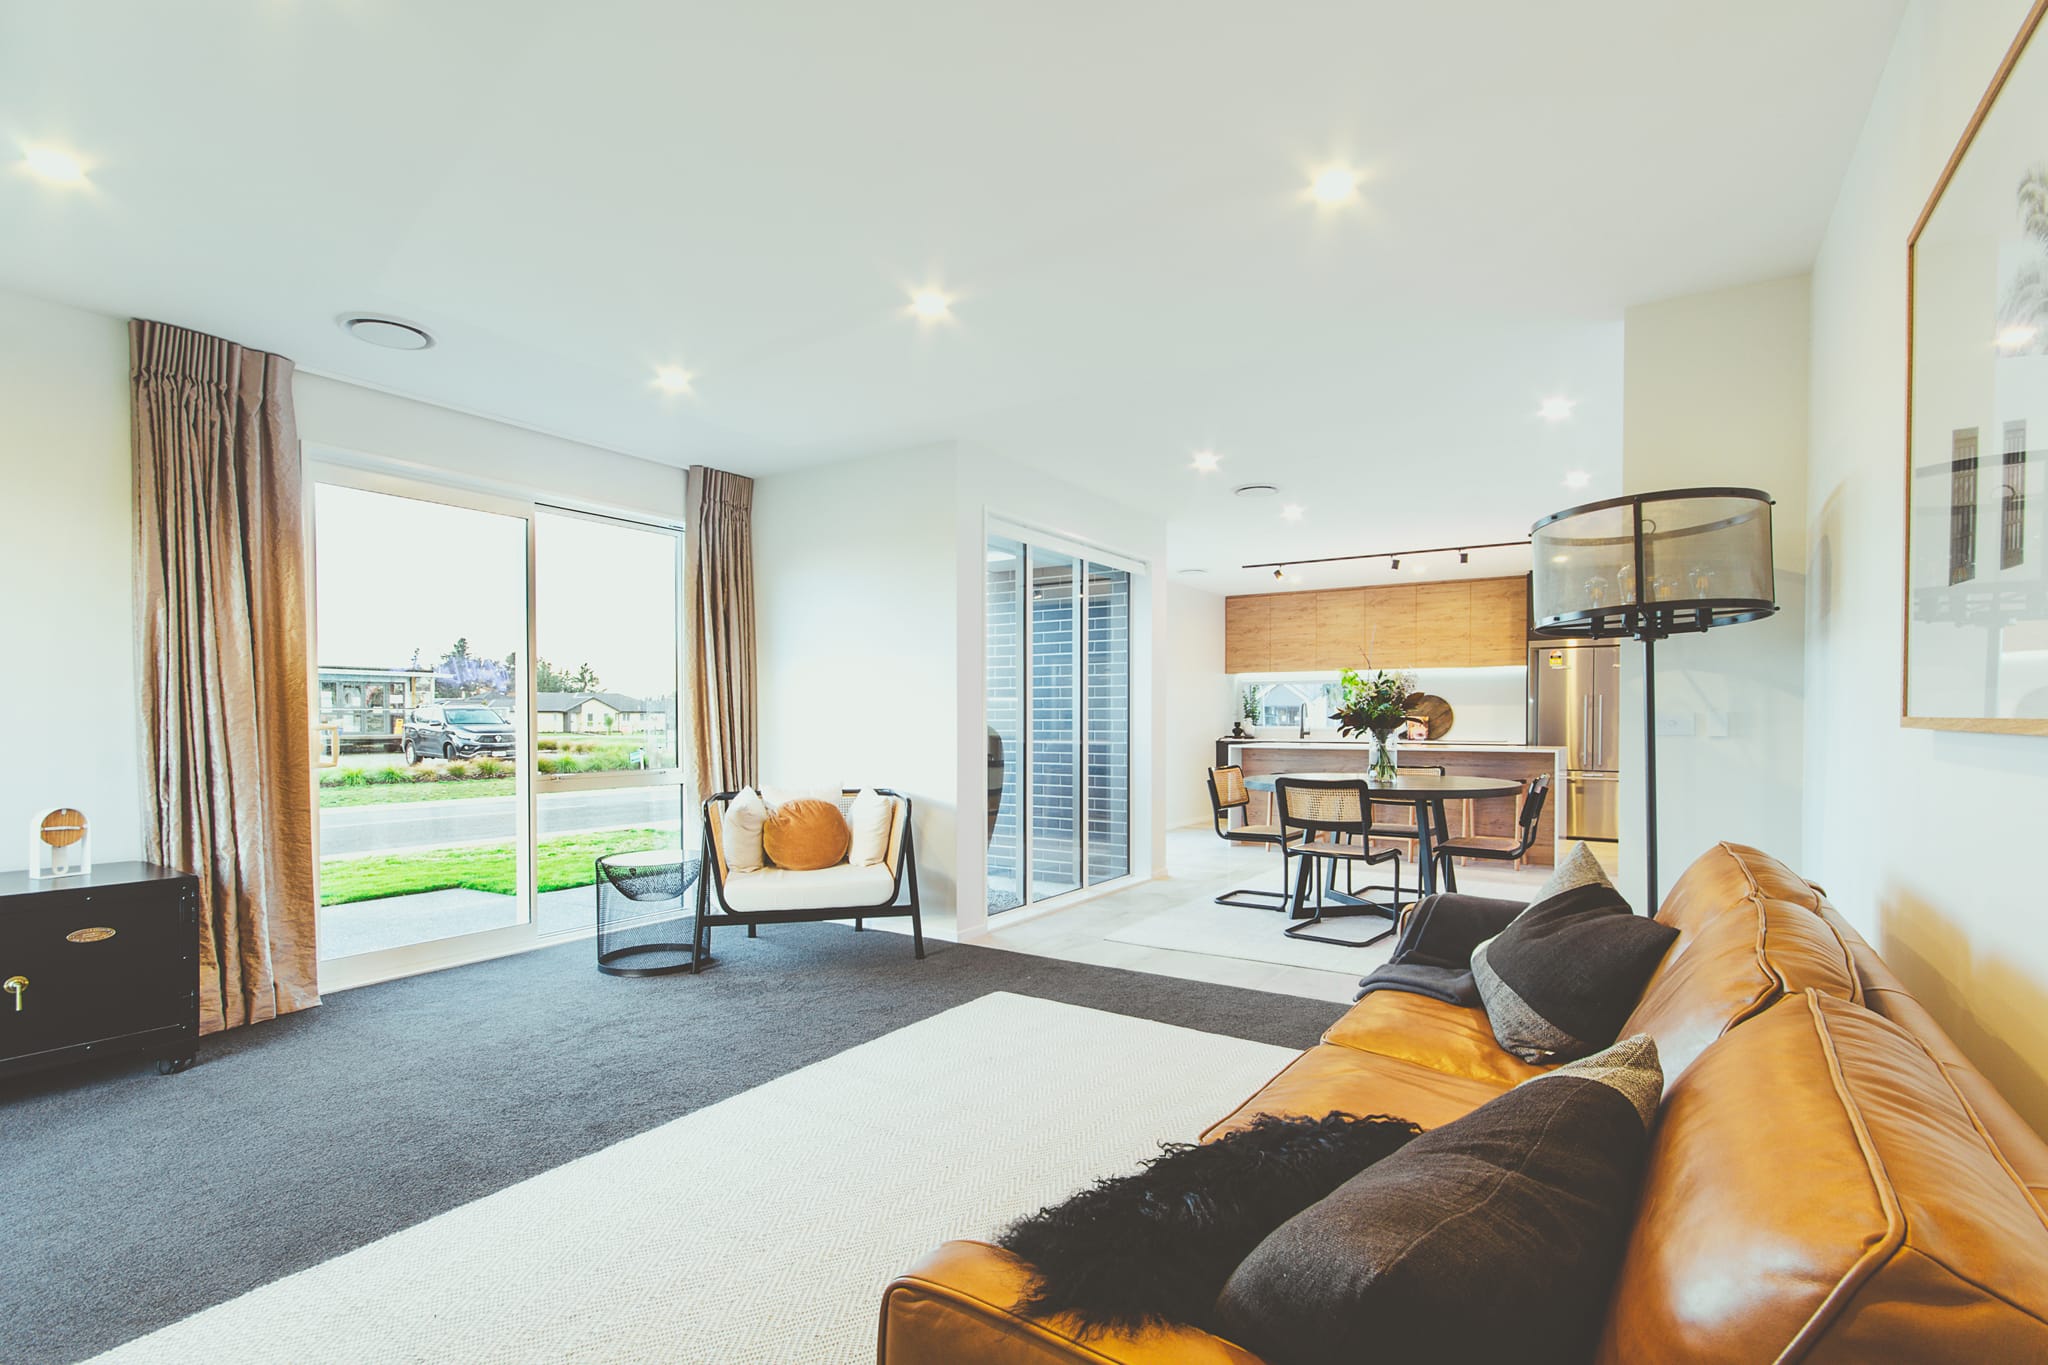 The Ravenswood new build in Christchurch, New Zealand built by Trendsetter Homes who work across Kaiapoi, Woodend and wider Canterbury